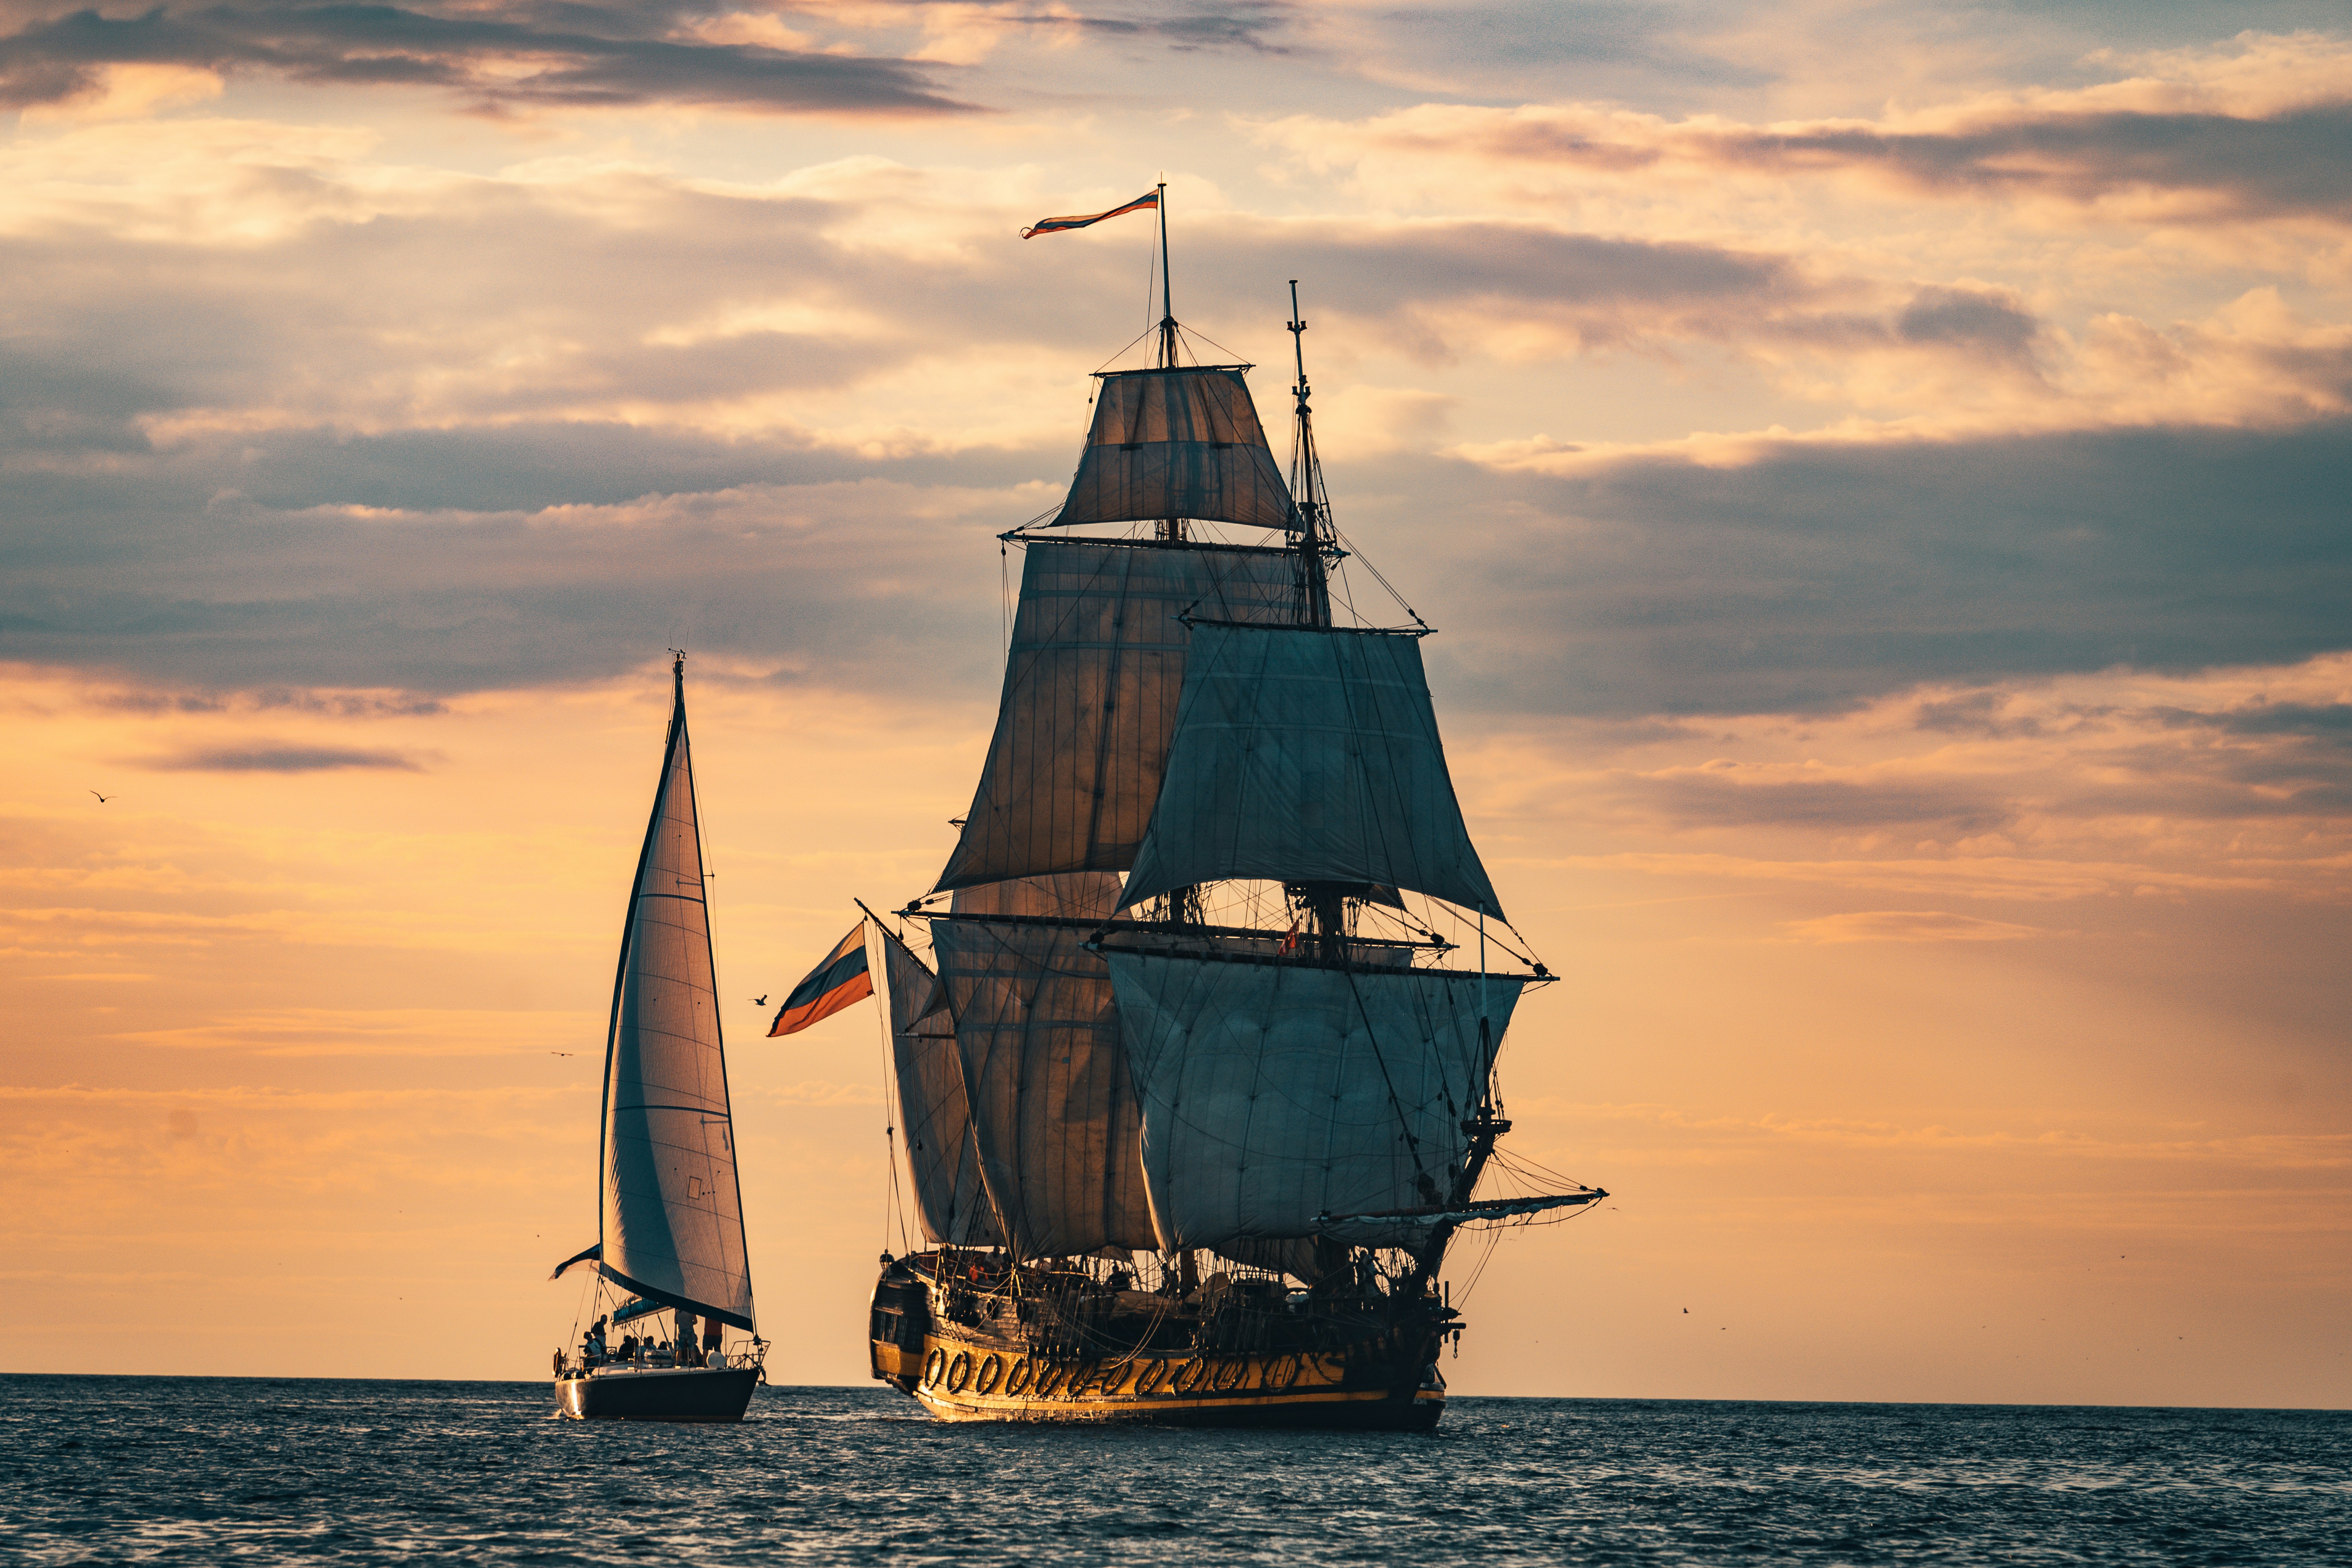 The Frigate Shtandart is the exact replica of the man-of-war built by Peter the Great in 1703 in order to defend Saint Petersburg. The Frigate Shtandar in calm weather sailing sunset time Riga Latvia